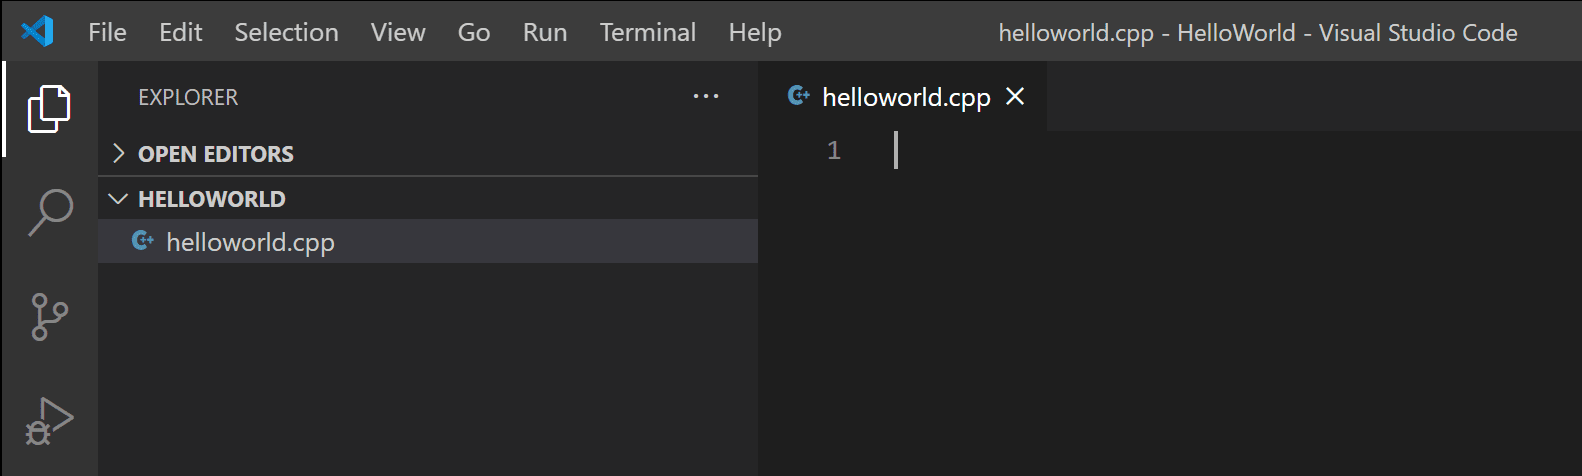 helloworld.cpp file